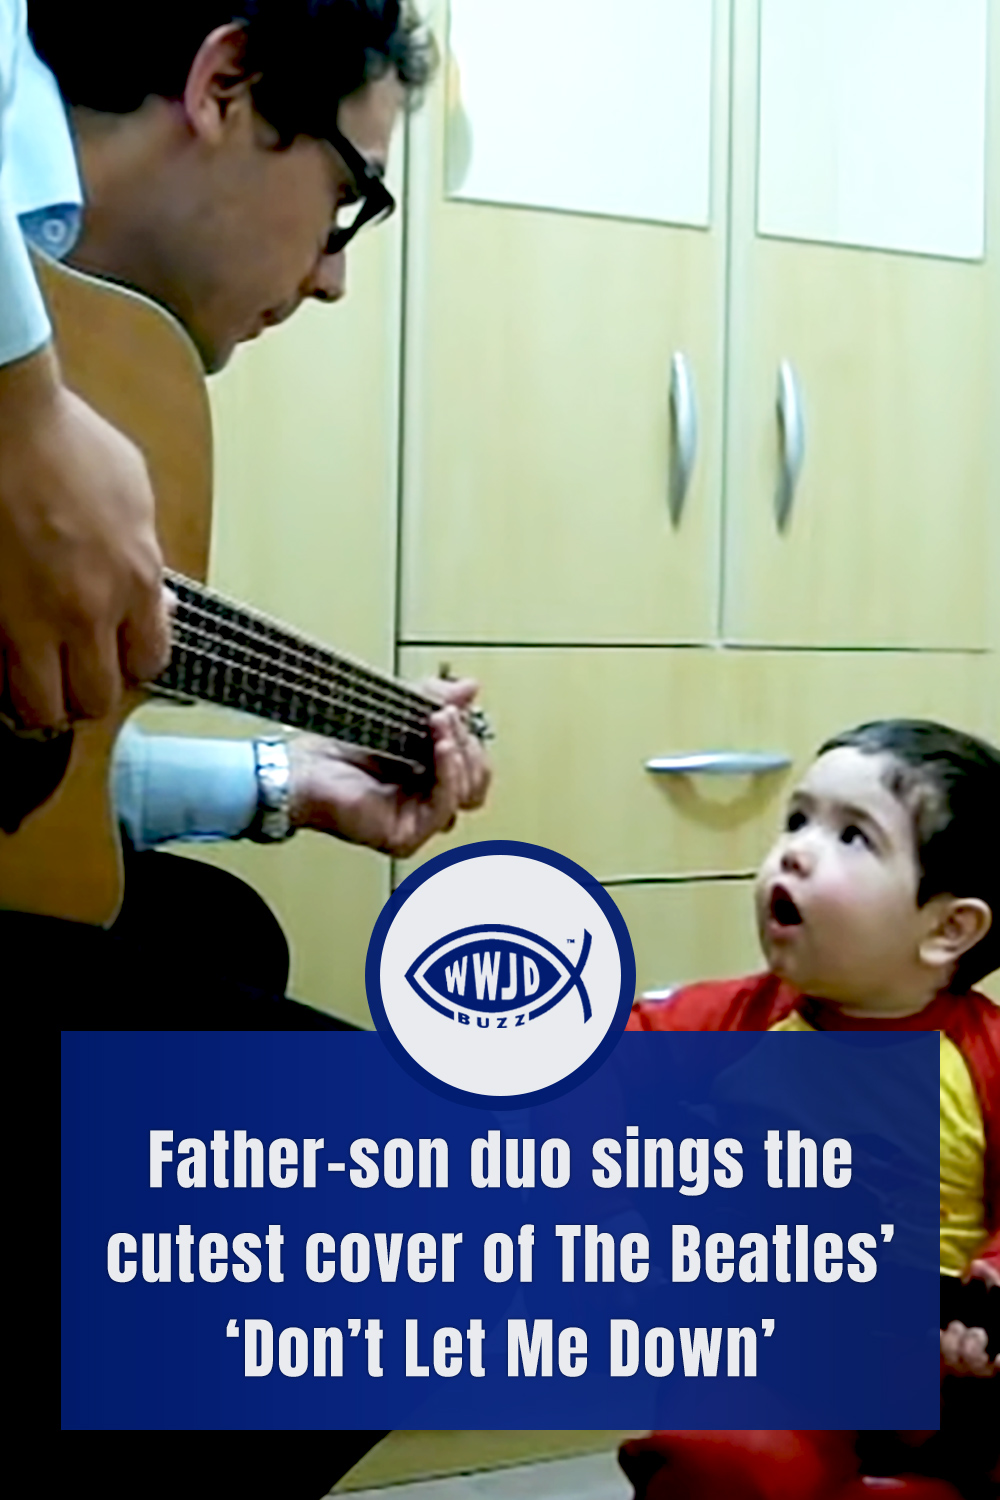 Father-son duo sings the cutest cover of The Beatles ‘Don’t Let Me Down’